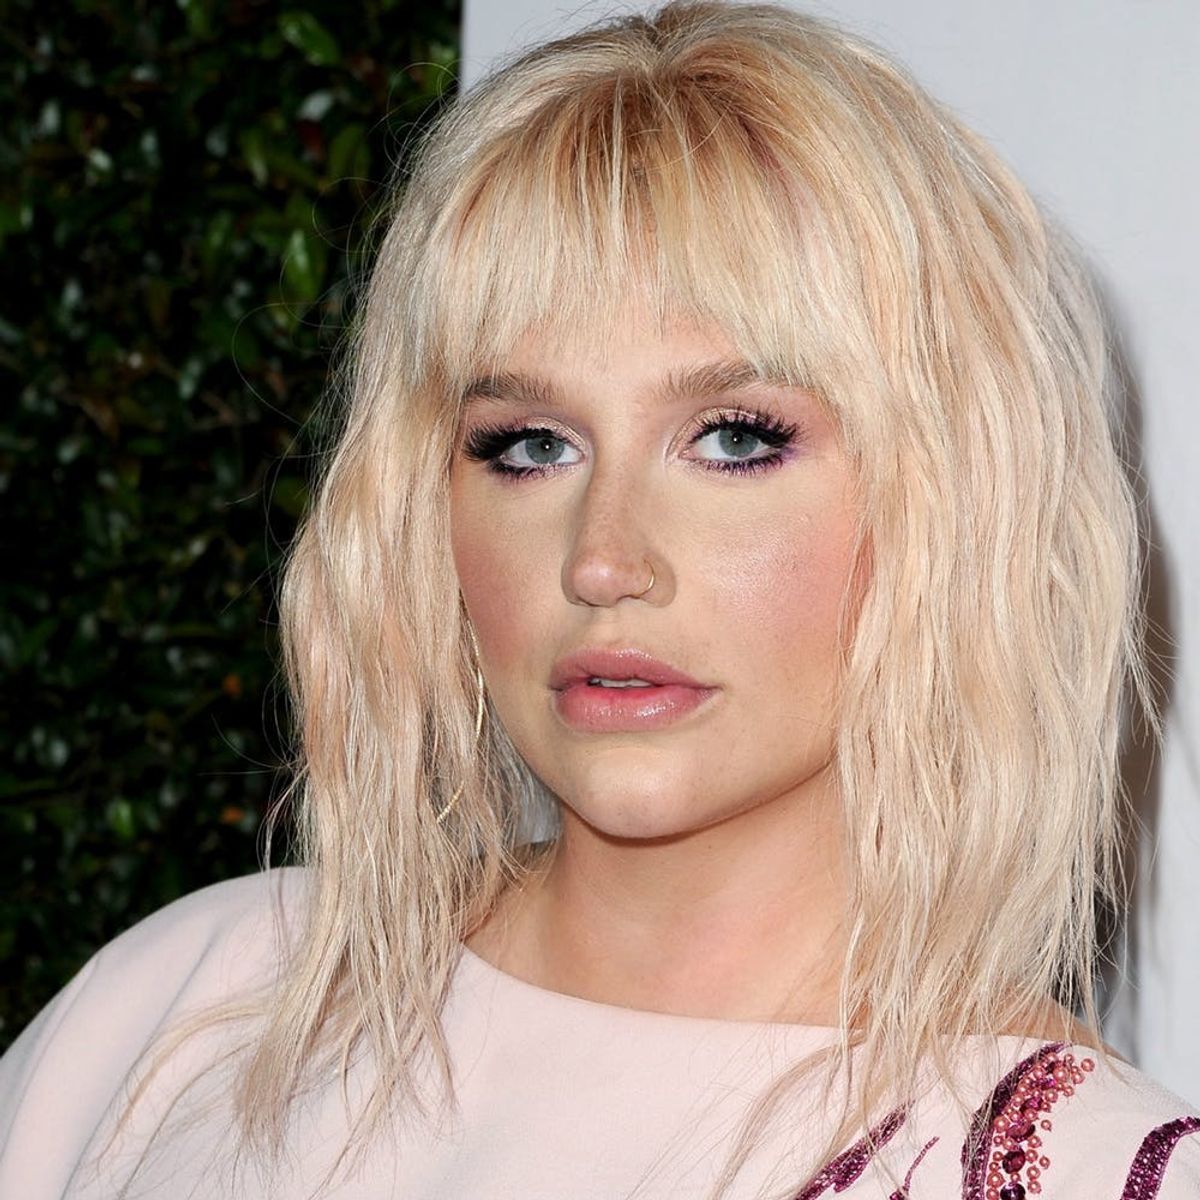 This Is the Complete Recap of Kesha’s Journey to Tonight’s Billboard Awards Performance